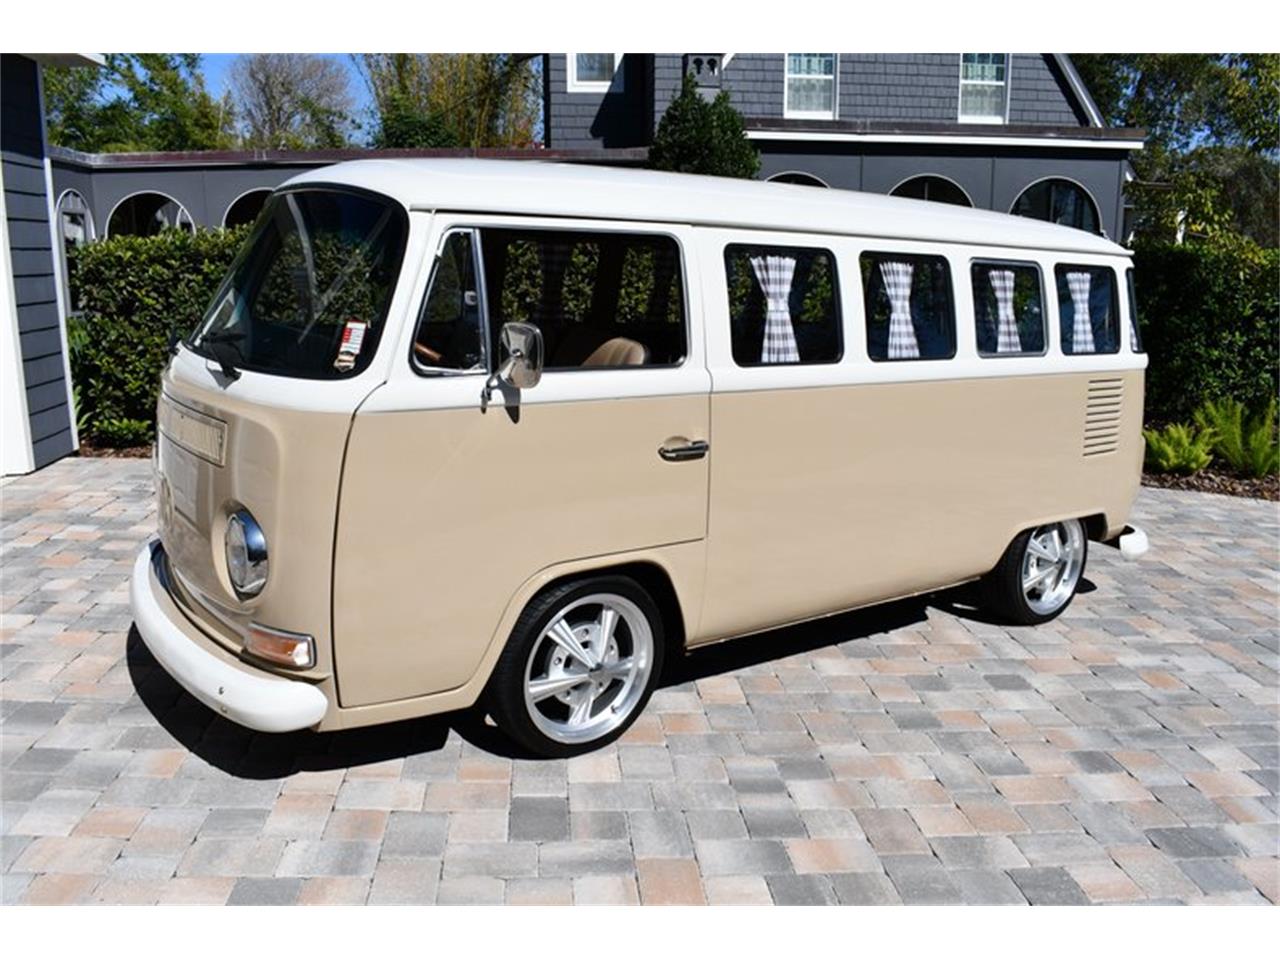 For Sale at Auction: 1976 Volkswagen Bus in Lakeland, Florida for sale in Lakeland, FL